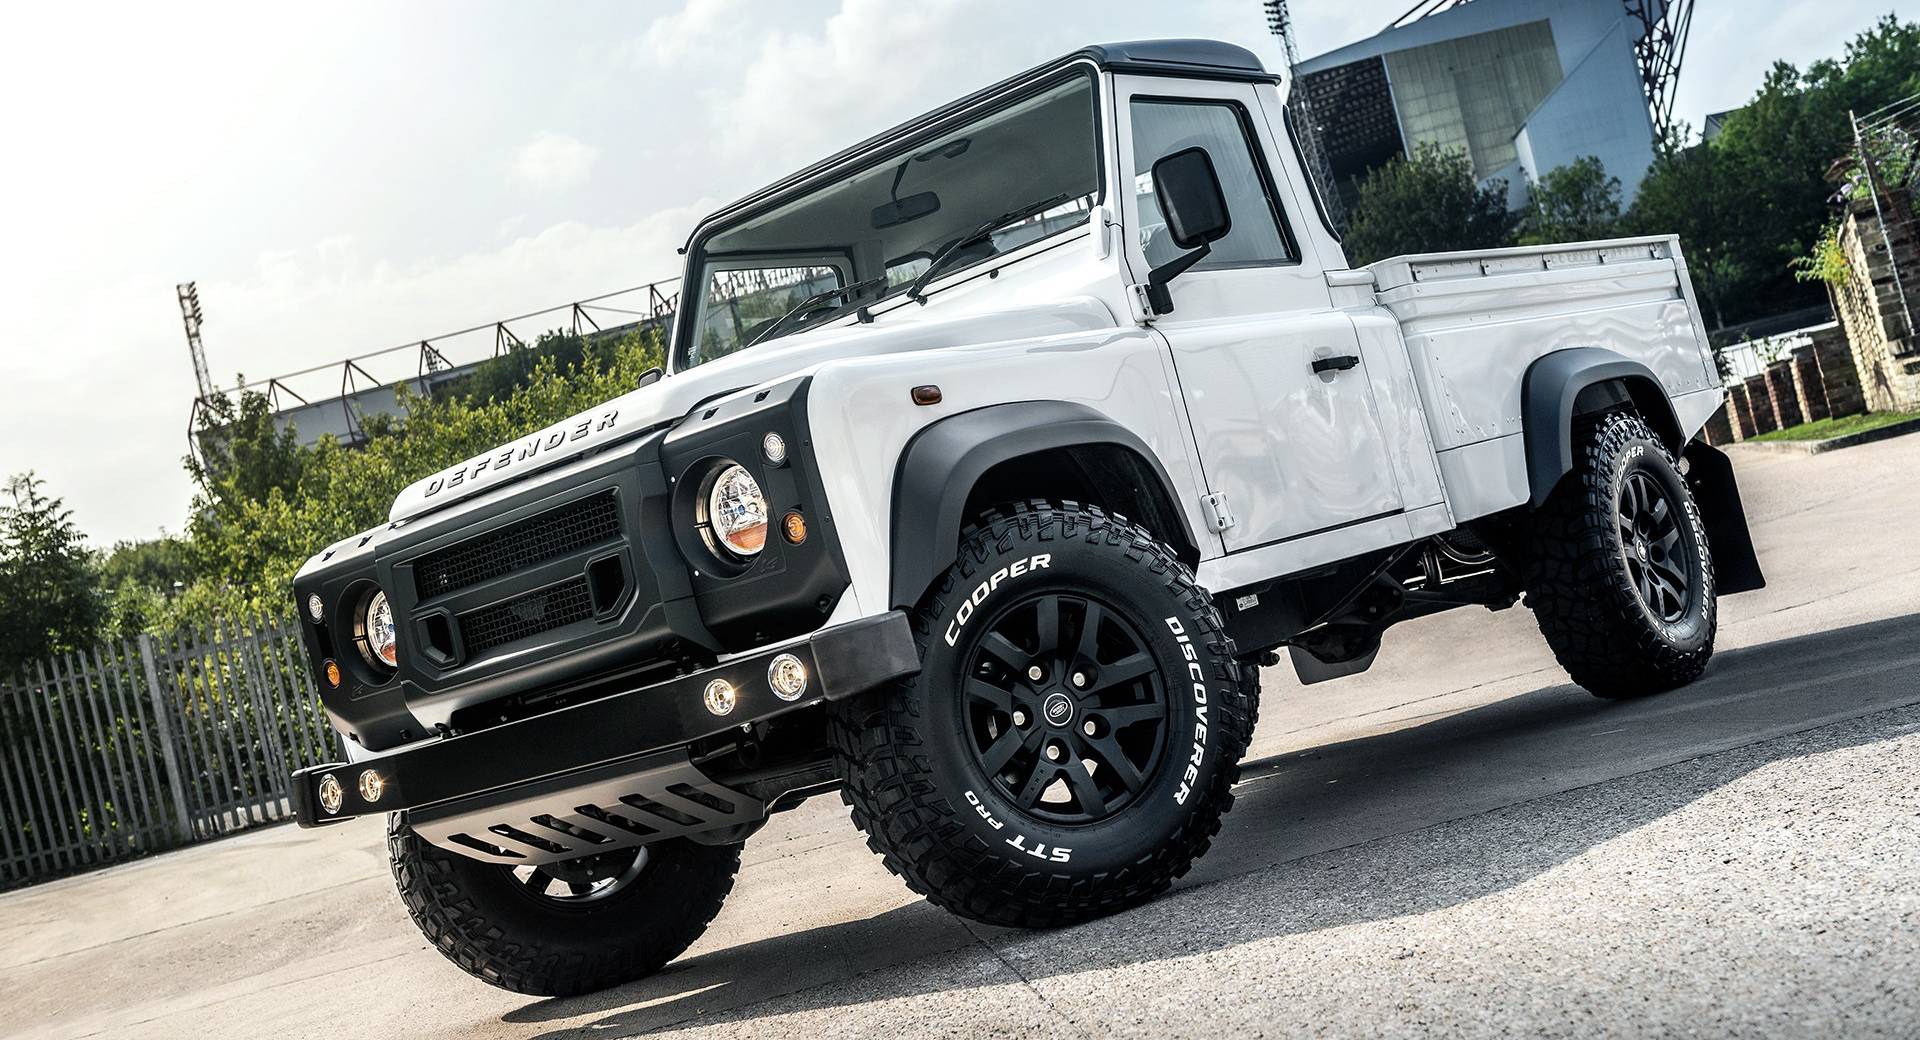 Continentaal cache maat At $42k, Chelsea Truck's Custom Land Rover Defender Pickup Is A Steal |  Carscoops